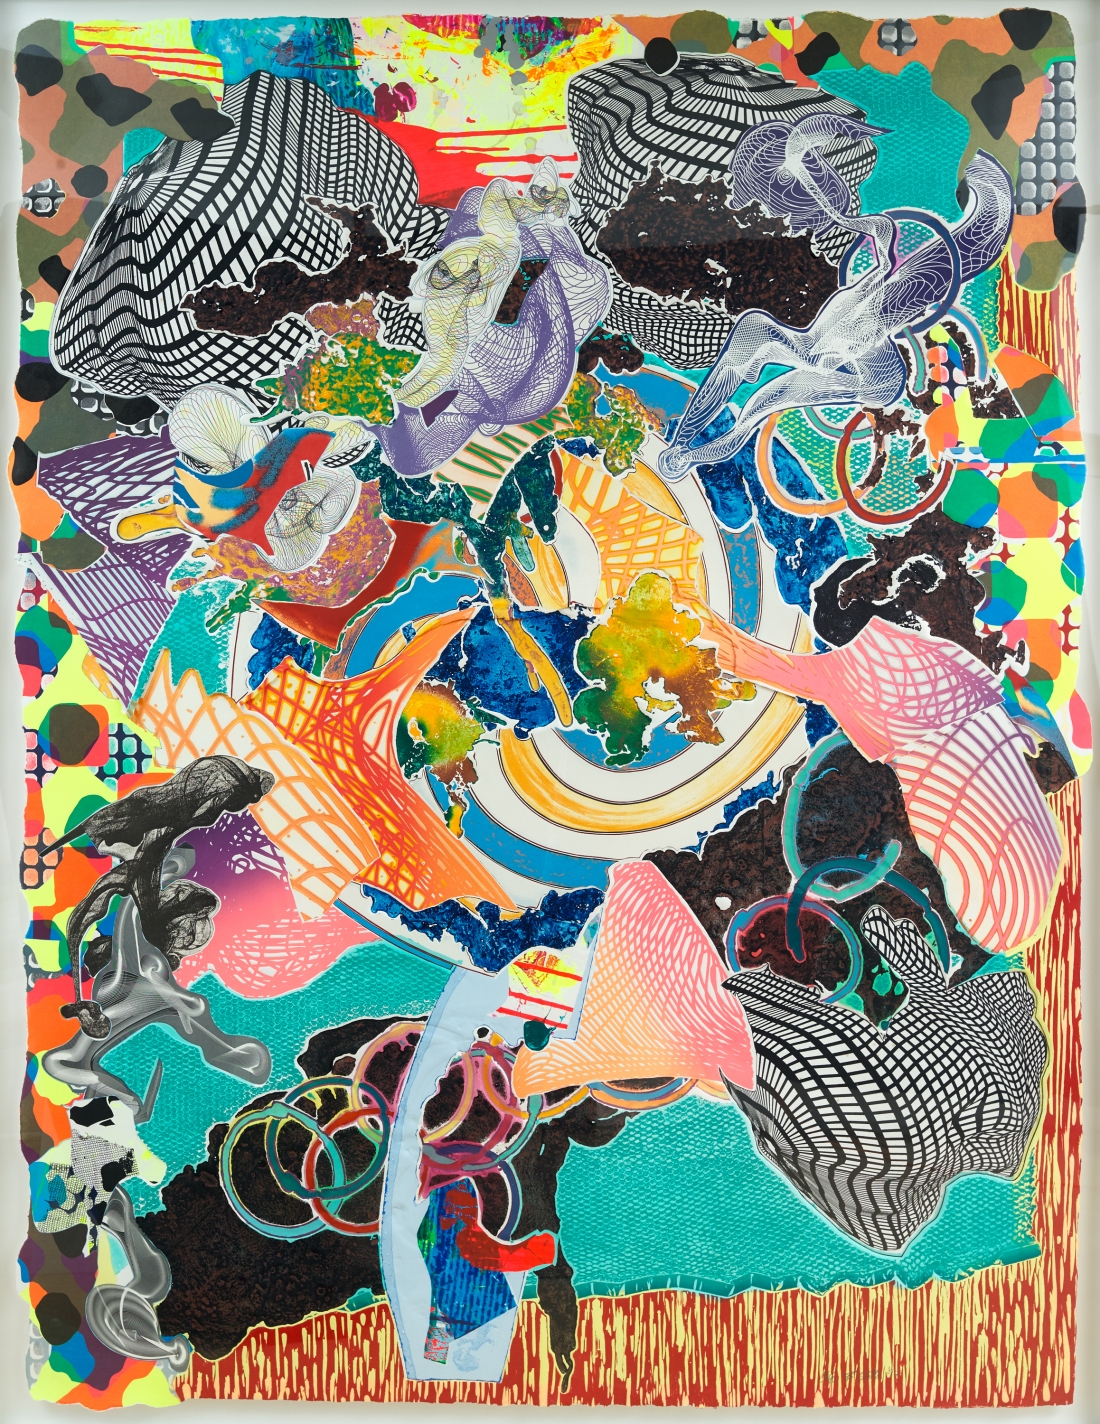 Juam, State I (1997) by Frank Stella. Hand colored relief, woodcut, etching and aquatint on paper,